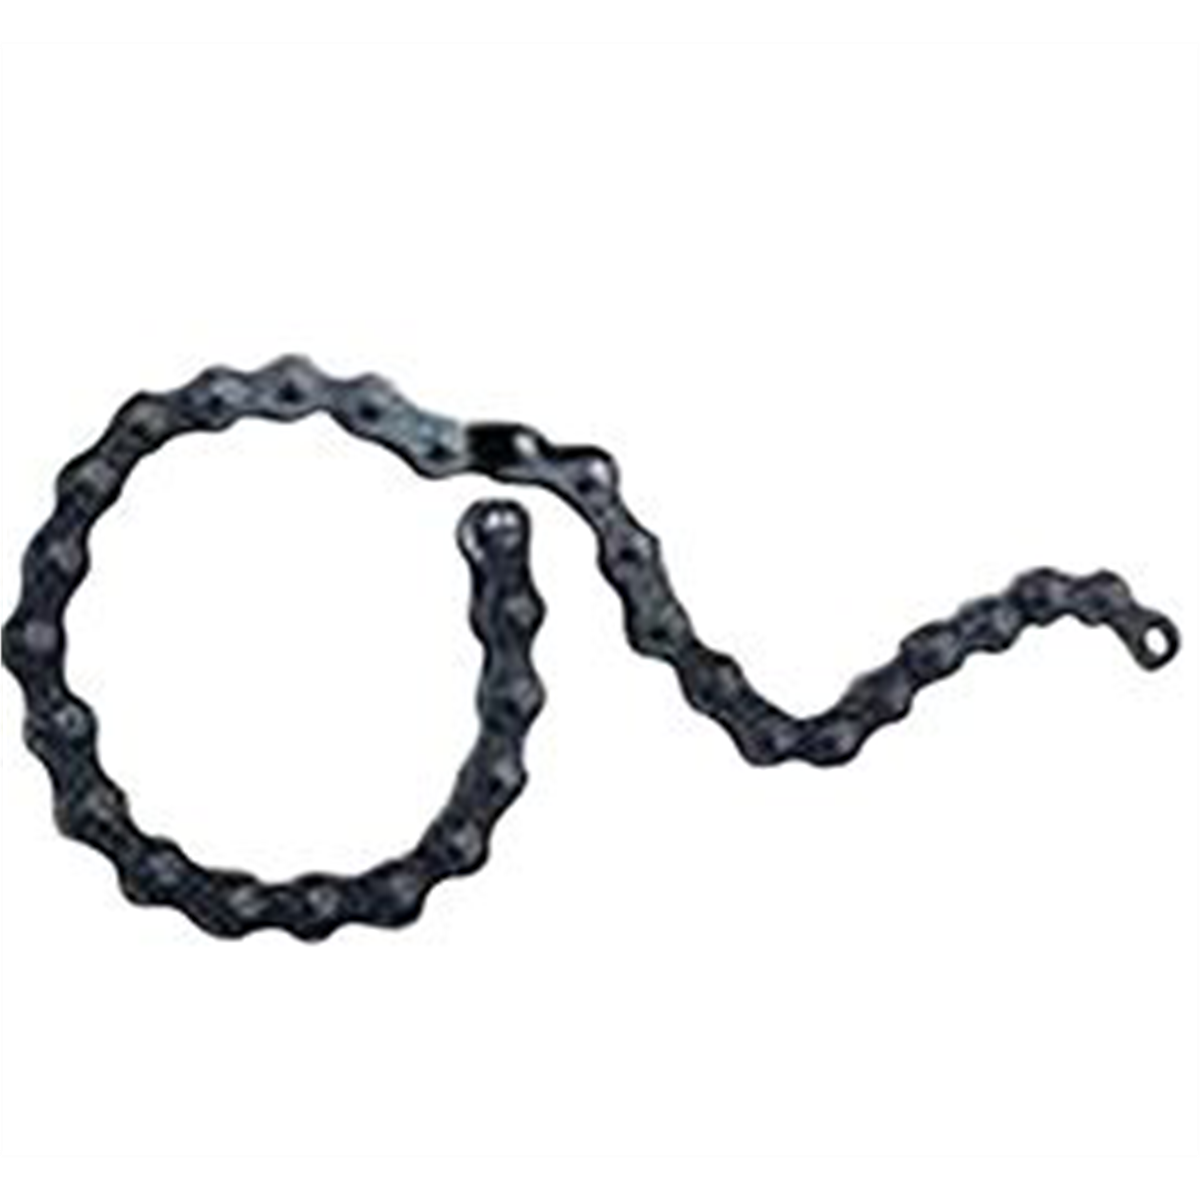 Replacement Chain for 6969